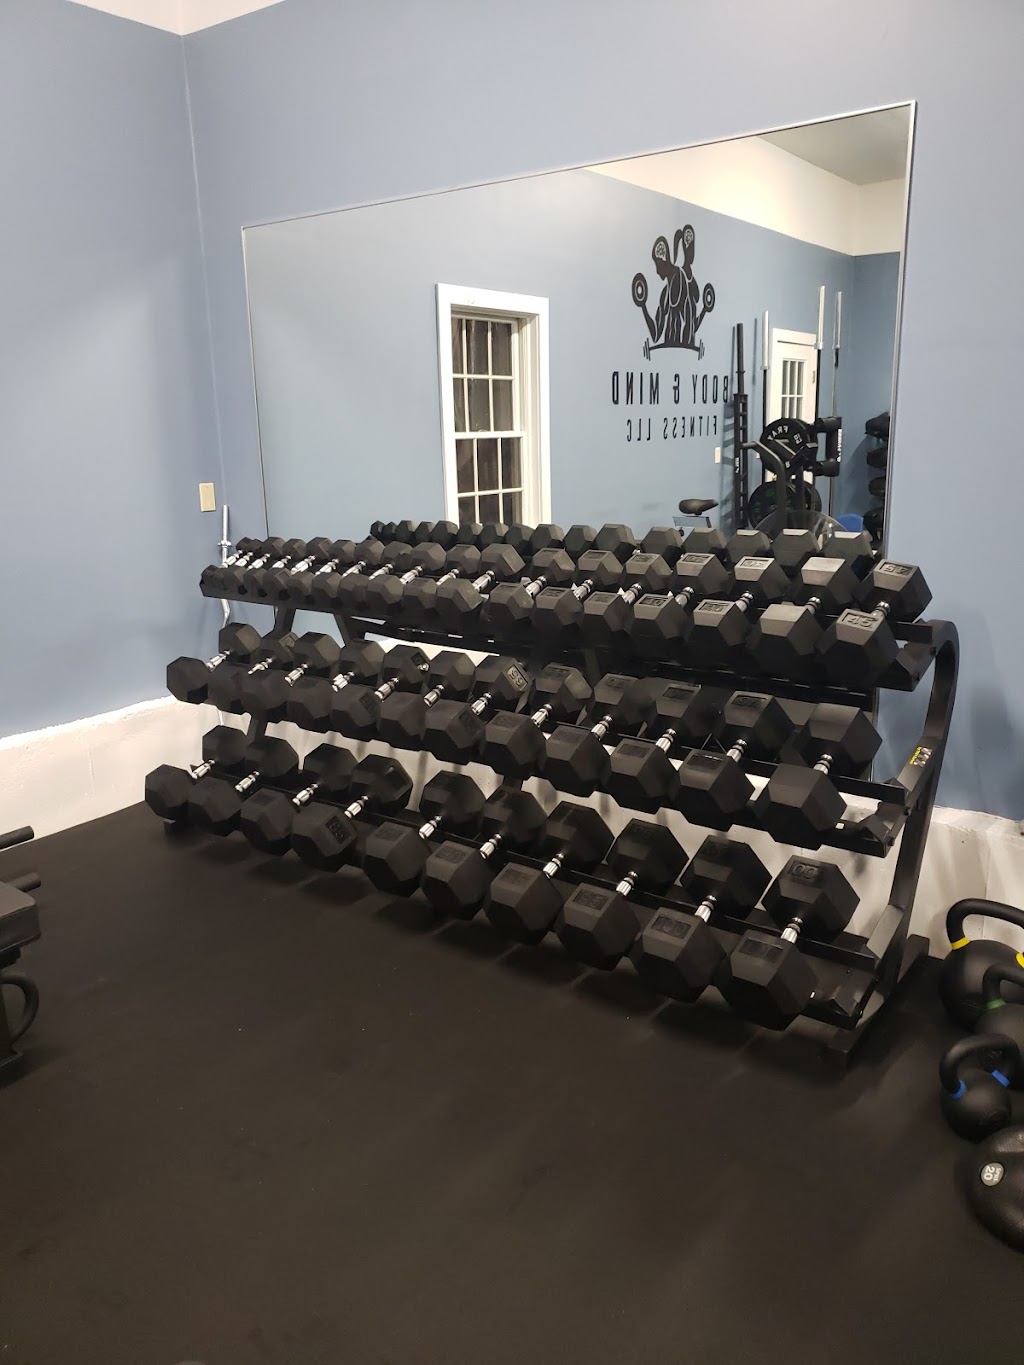 Body and Mind Fitness LLC | 169 Coleman Rd, Middletown, CT 06457 | Phone: (860) 816-2714